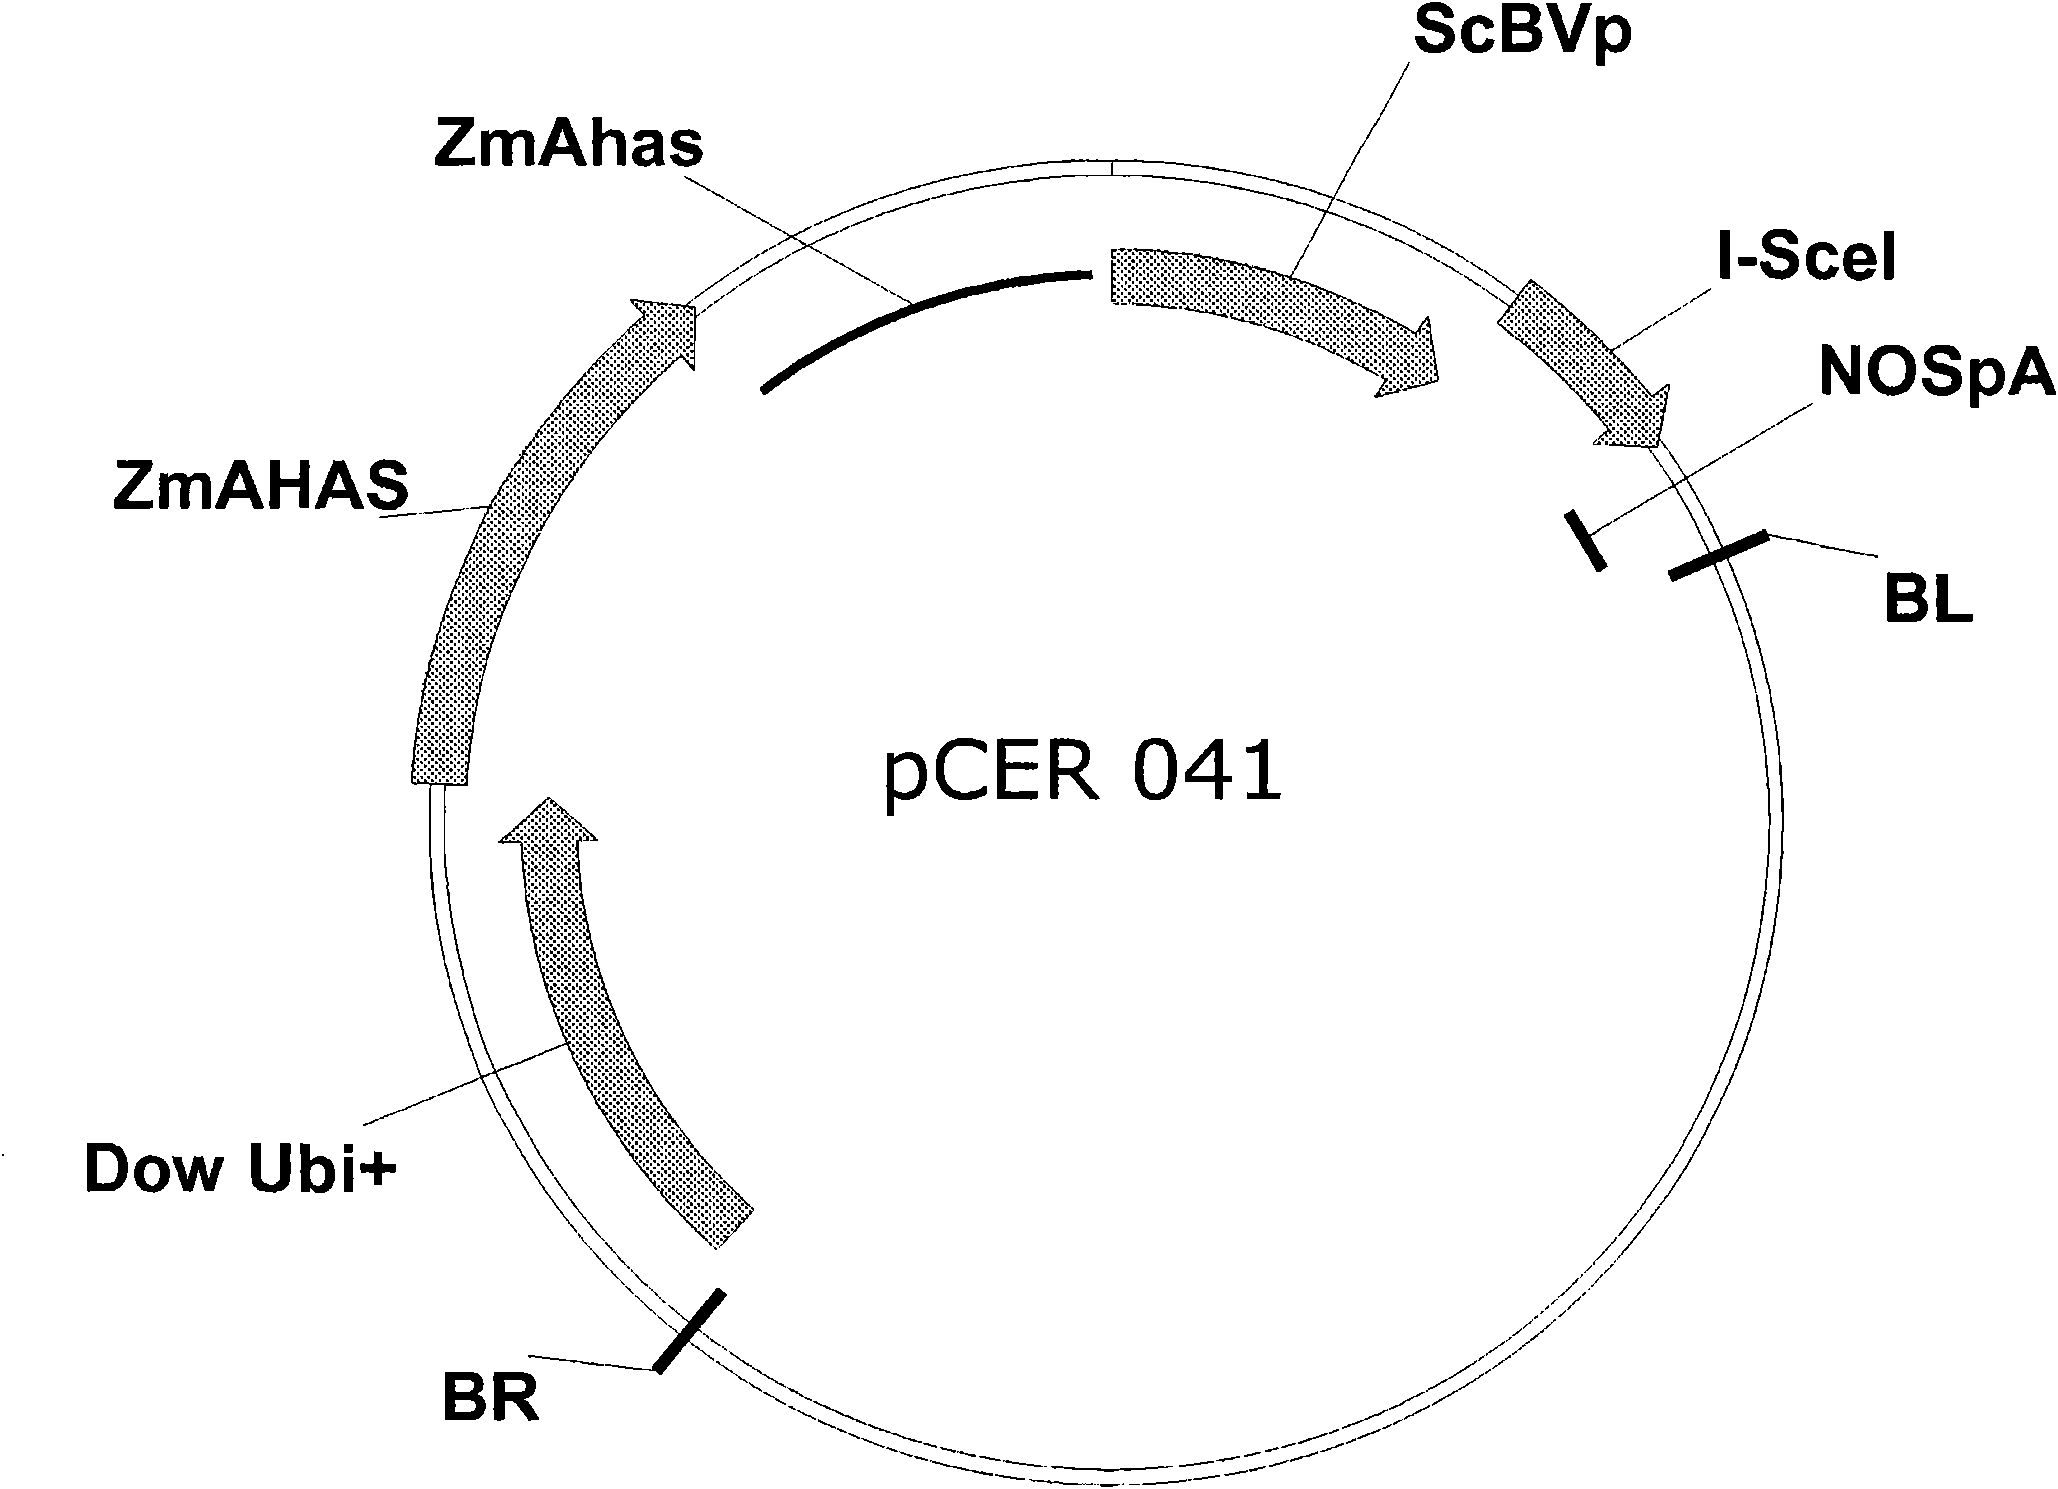 Method of excising a nucleic acid sequence from a plant genome